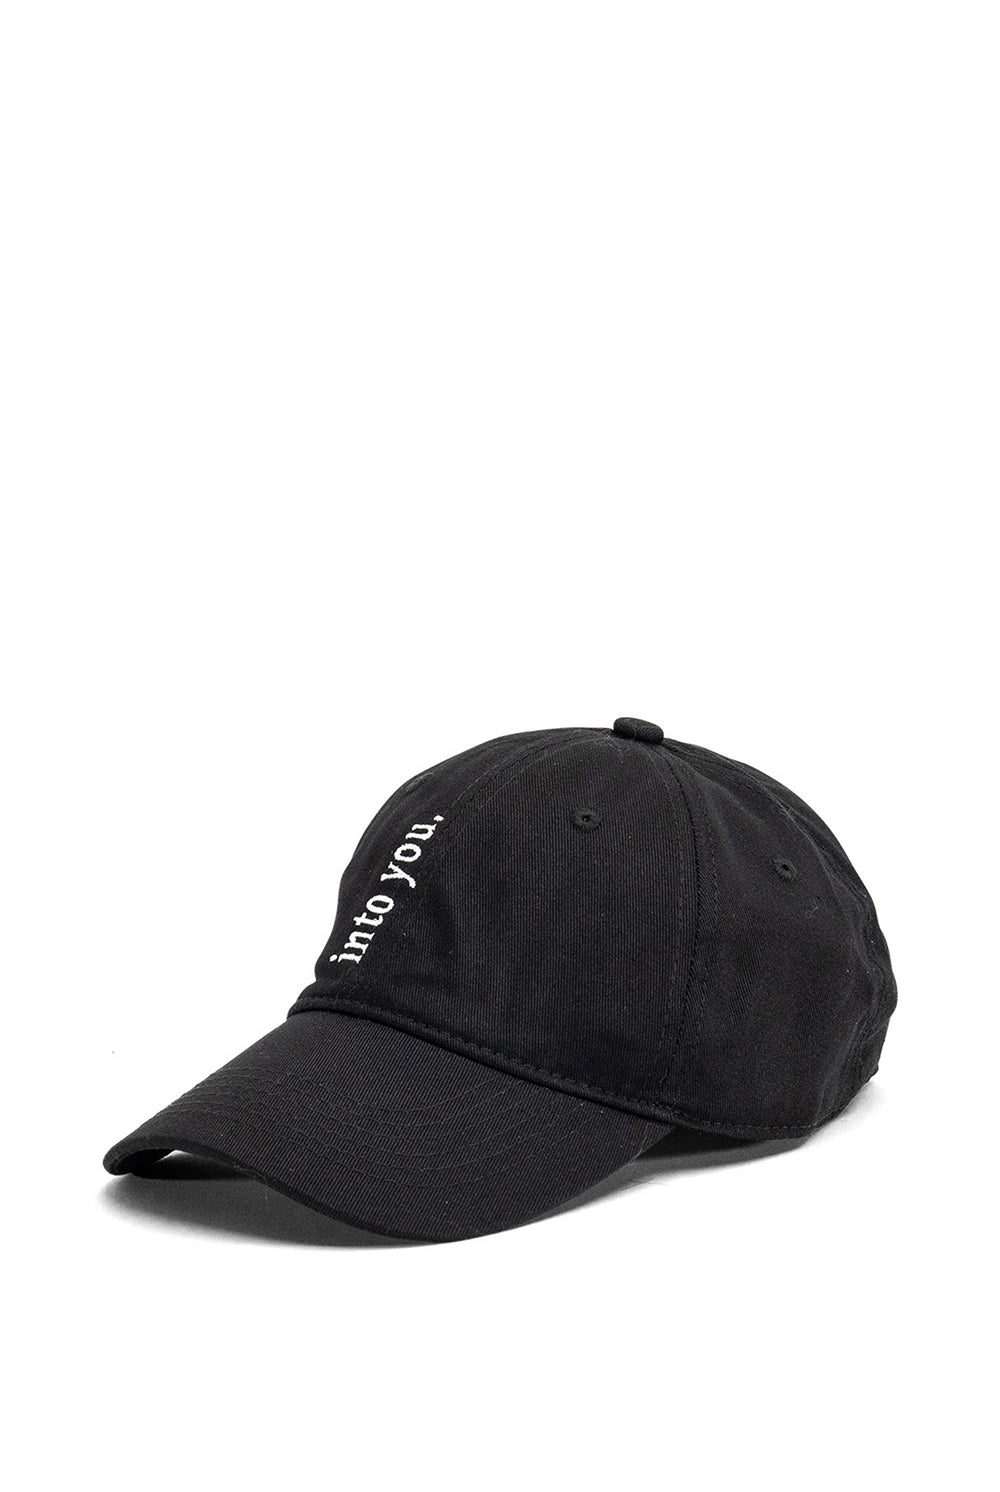 My Accessories London Into You Baseball Cap in Black | Hat | Womens accessories